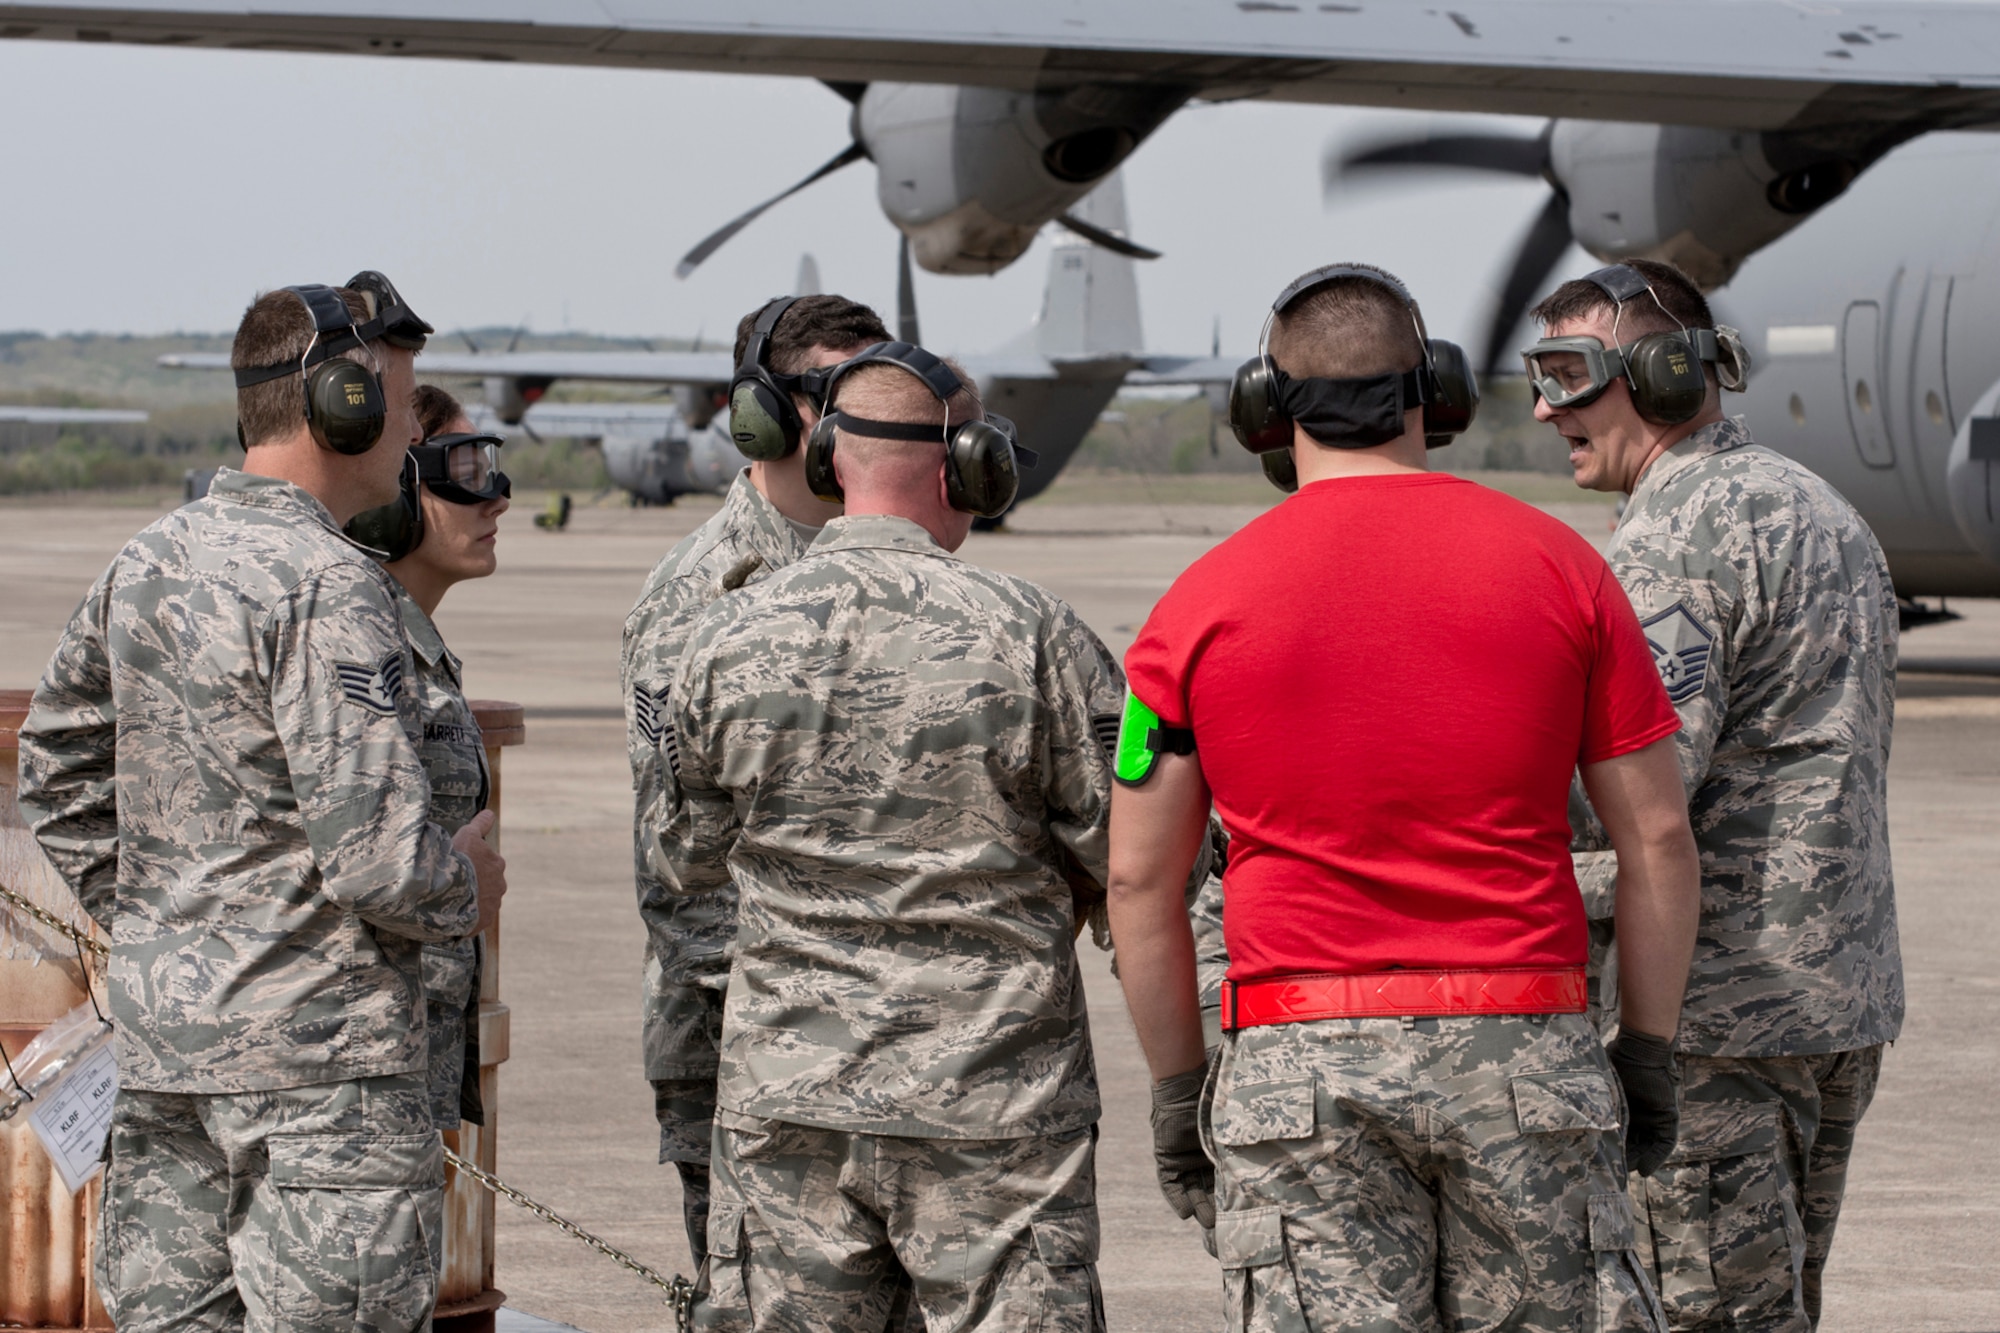 U.S. Air Force Reserve Master Sgt. Morgan Abner, air transportation craftsman, 96th Aerial Port Squadron, pumps up his team during an Engines Running On-Load/Odd-Load (ERO) of a C-130J Super Hercules training exercise April 2, 2017, at Little Rock Air Force Base, Ark. The team is preparing for a competition between air mobility professionals. (U.S. Air Force photo by Master Sgt. Jeff Walston/Released)